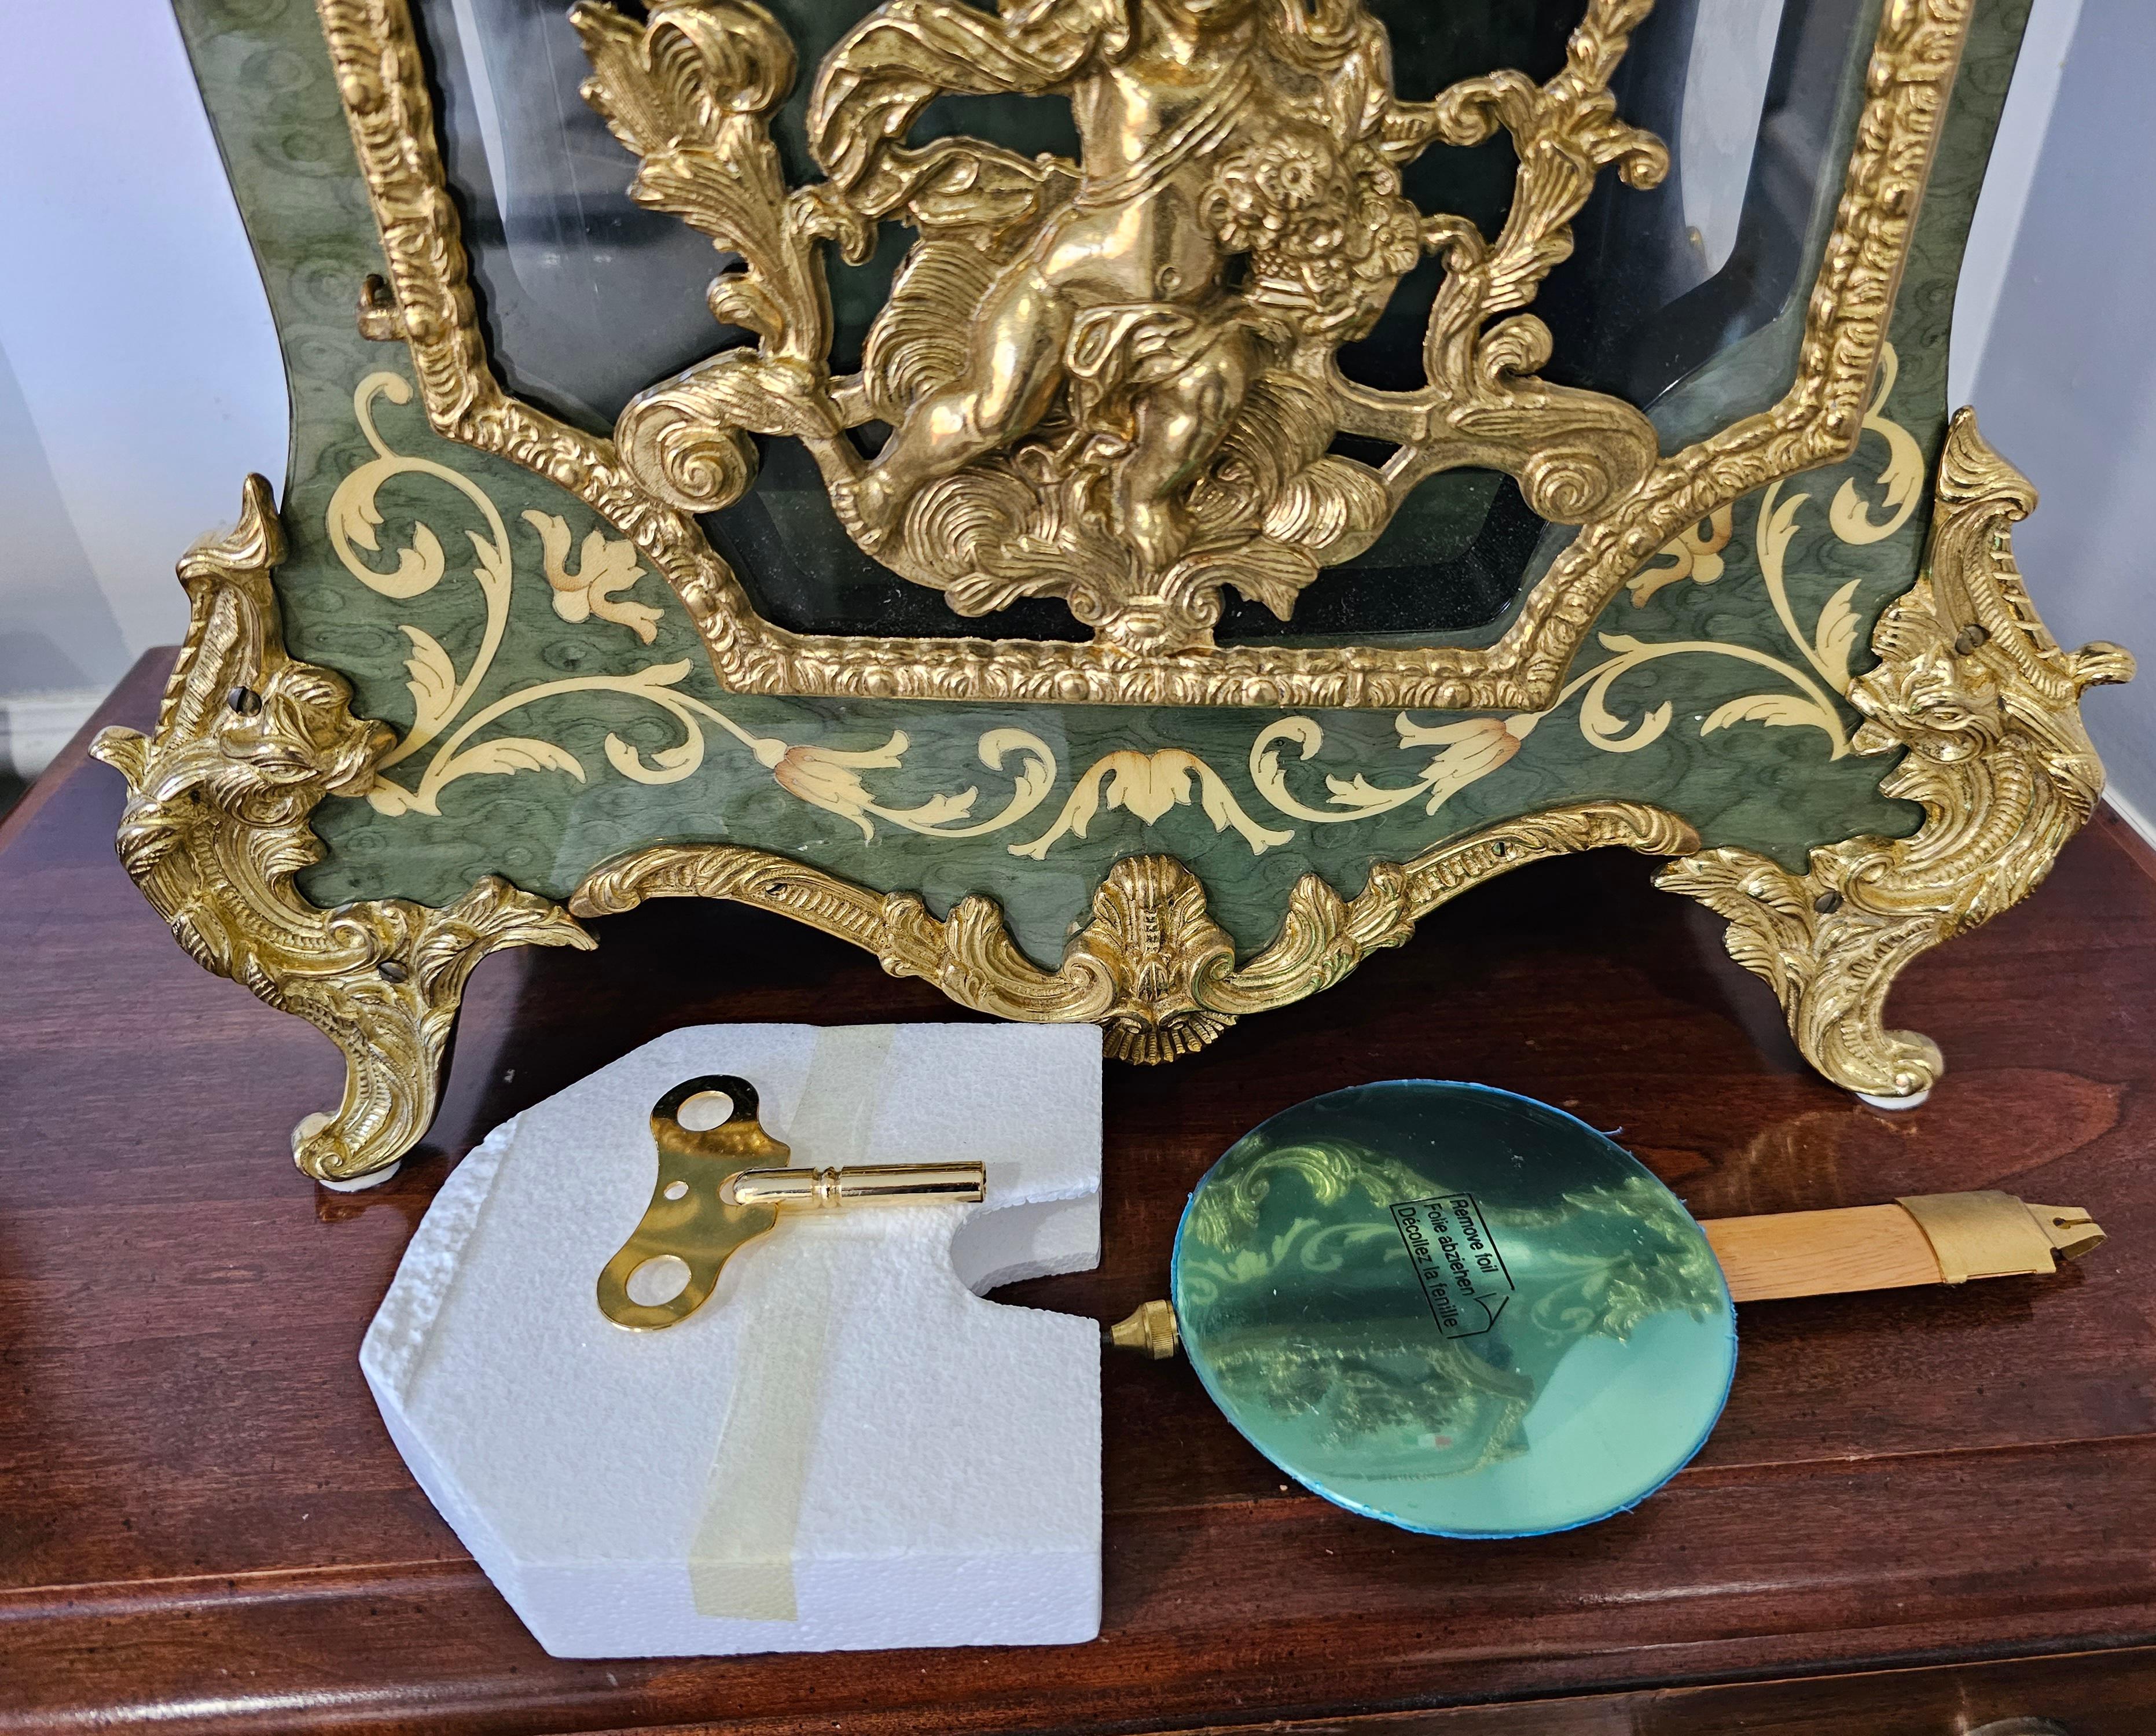 New Franz Hermle Mantel Clock in DeArt Italian Fine Marquetry and Ormolu Case For Sale 1